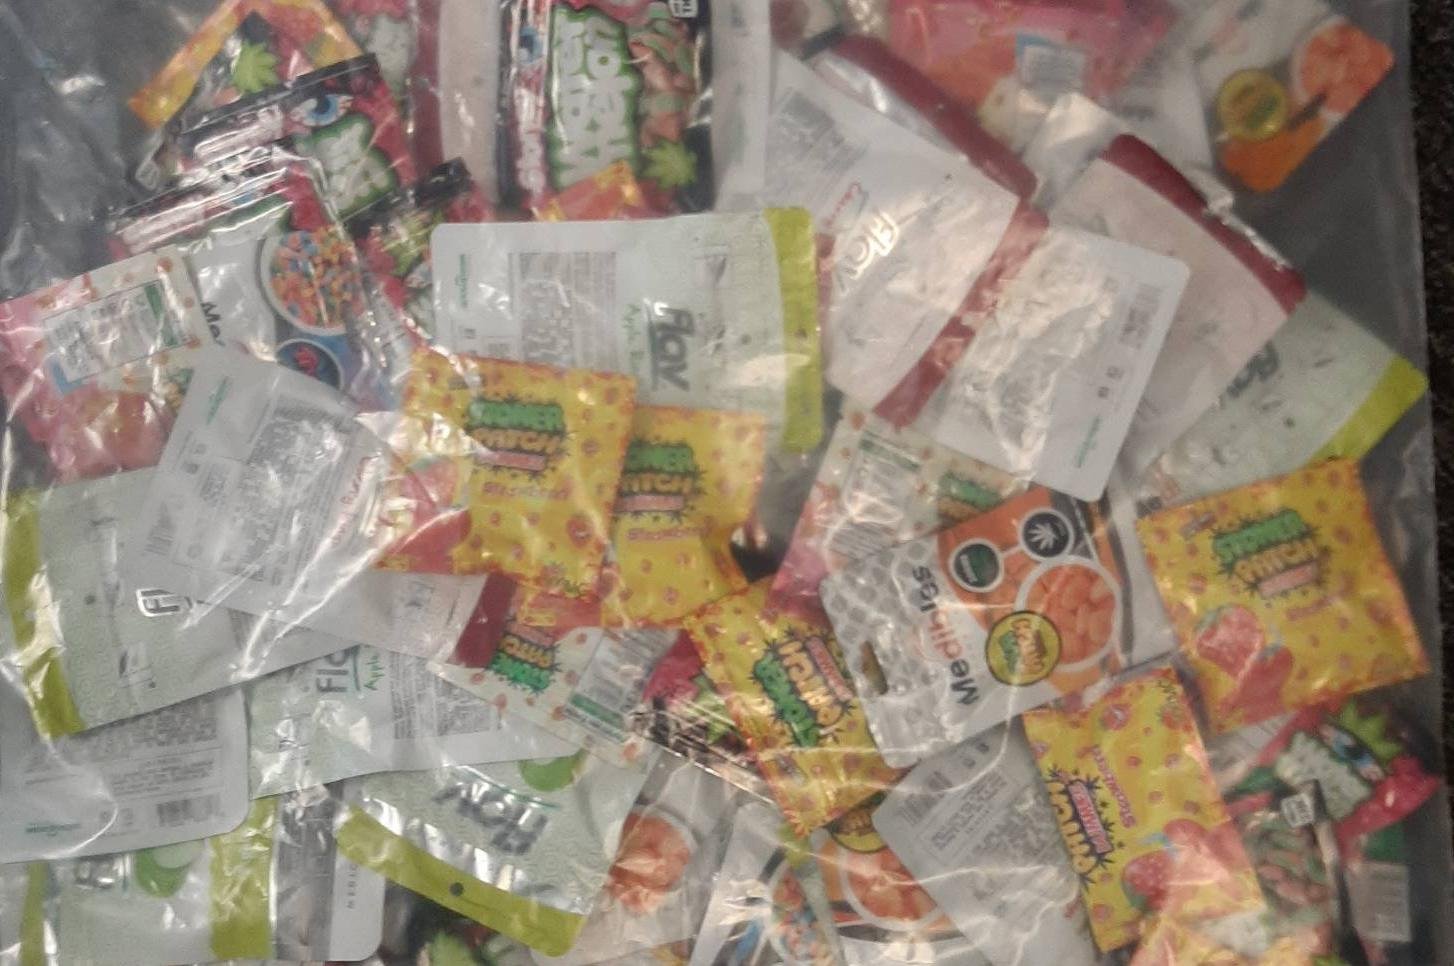 ‘Cannabis infused edibles’ seized in Newtownabbey